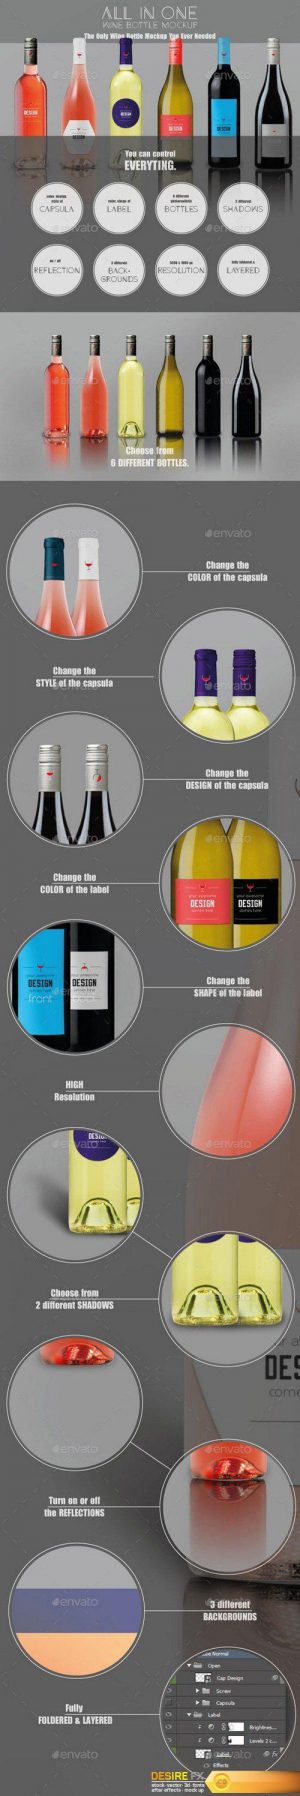 Graphicriver – All-In-One Wine Bottle MockUp 11744652